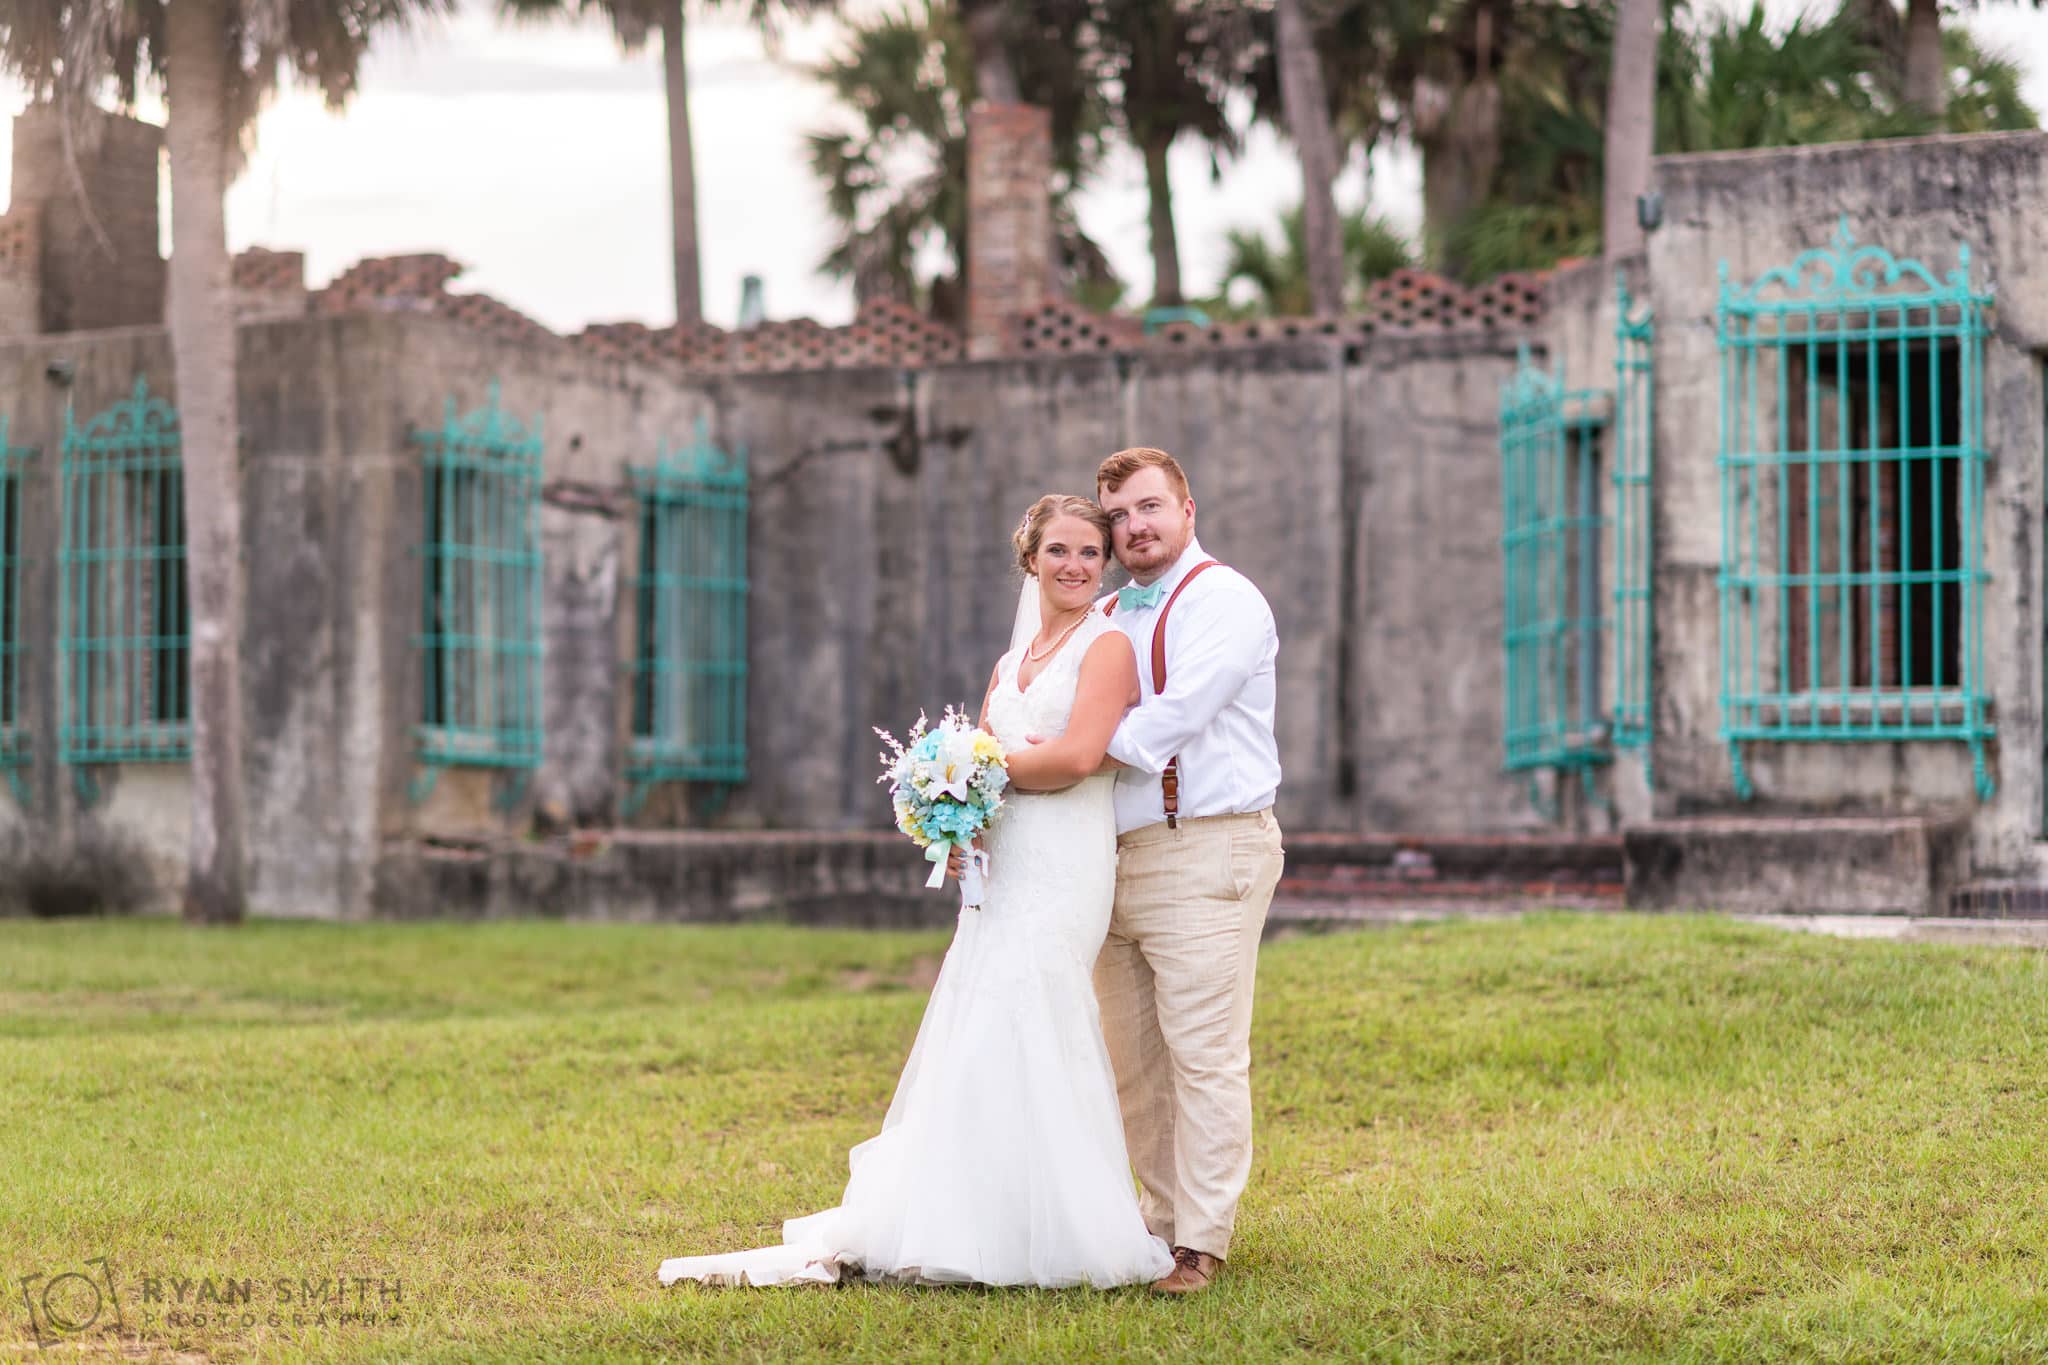 Prom pose, you have to do one every wedding! - Atalaya Castle - Huntington Beach State Park